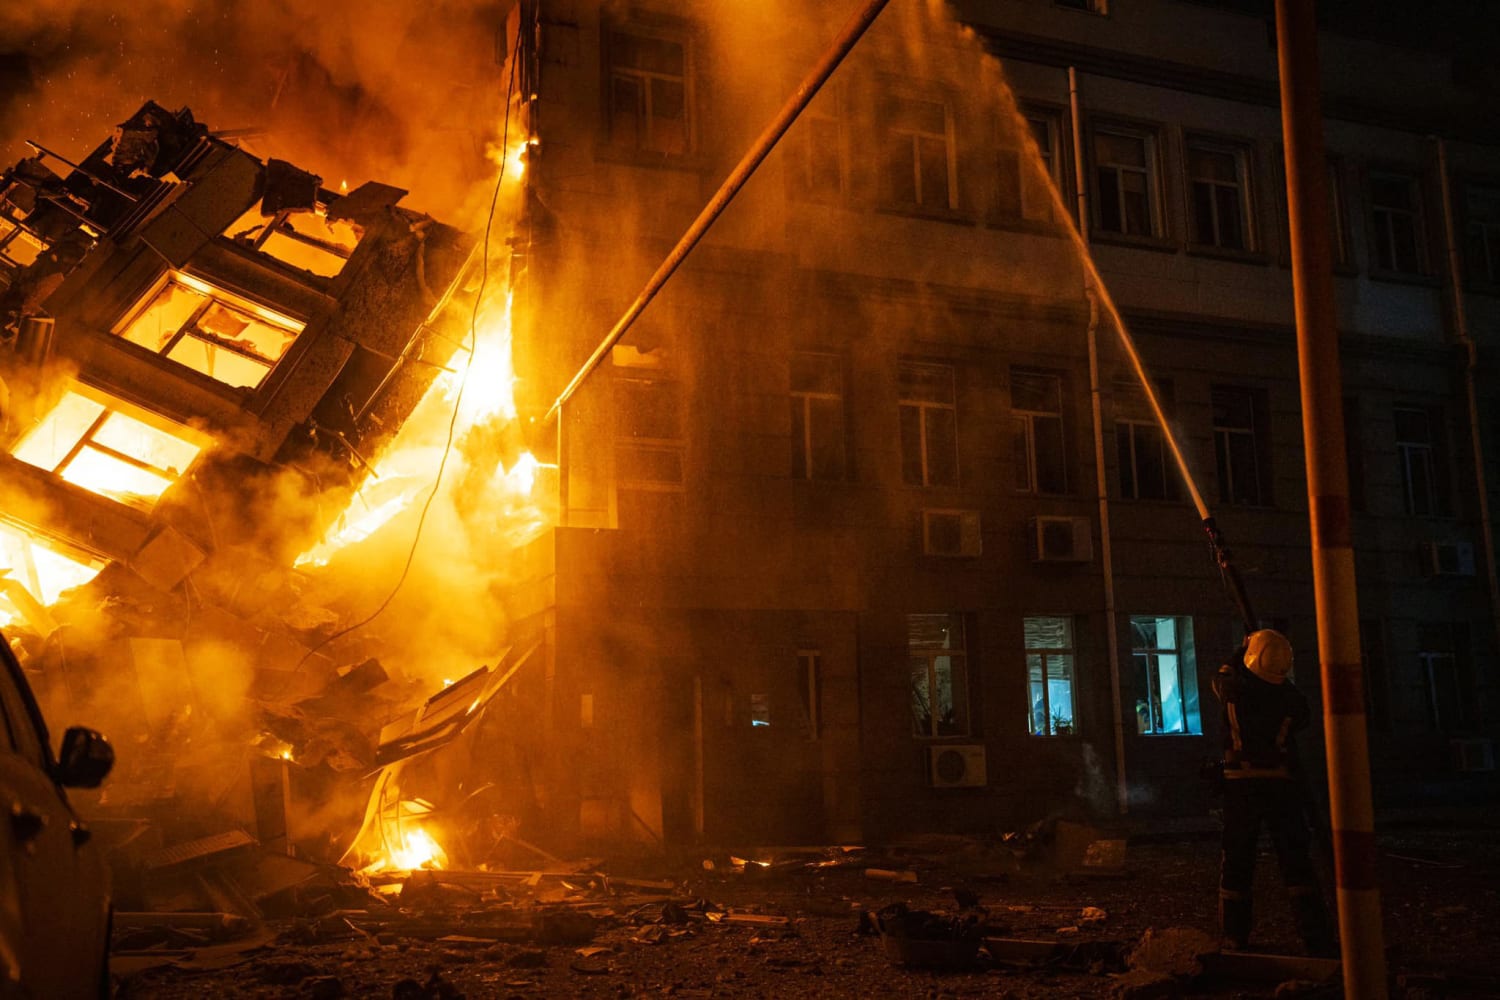 Russia pounds southern Ukraine in third night of fiery attacks